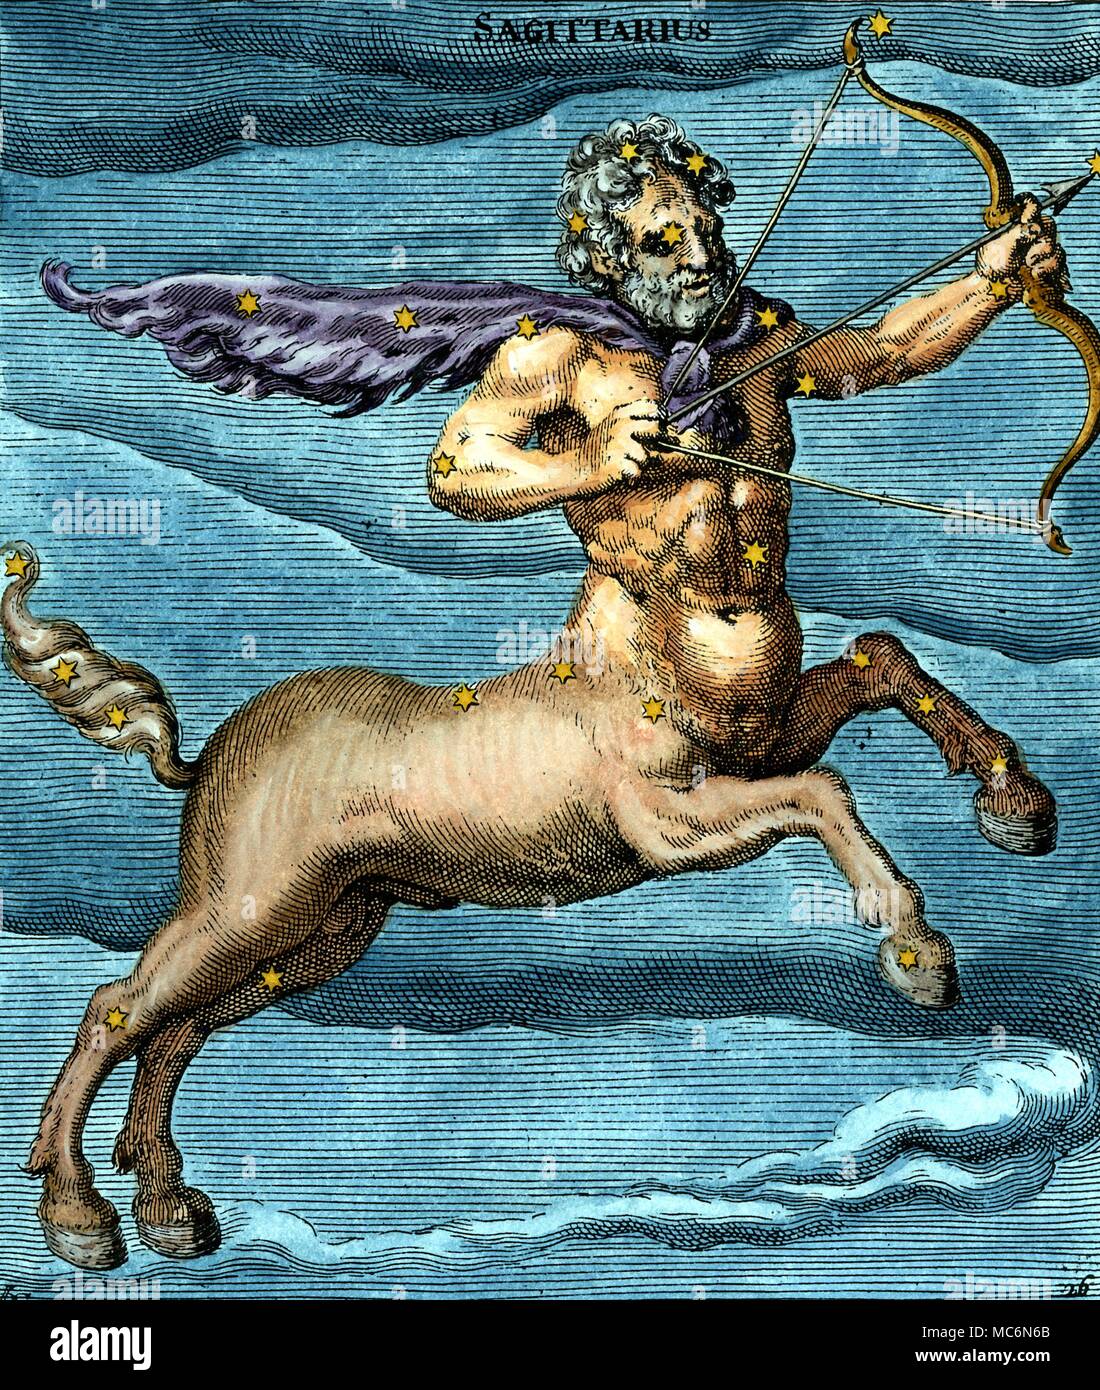 Constellations Sagittarius Eighteenth century hand coloured engraving of constellational Sagittarius the horse man based on the illumination in the 9th century Aratea manuscript in Leiden which is itself based on the Latin translation of the original Greek of Aratus written in the first century of our era. Aratus was born in about 315 BC in Soli on the south coast of present Turkey and is said to have written his phaenomena for the ruler of Macedonia Antigonus Gonatas Stock Photo